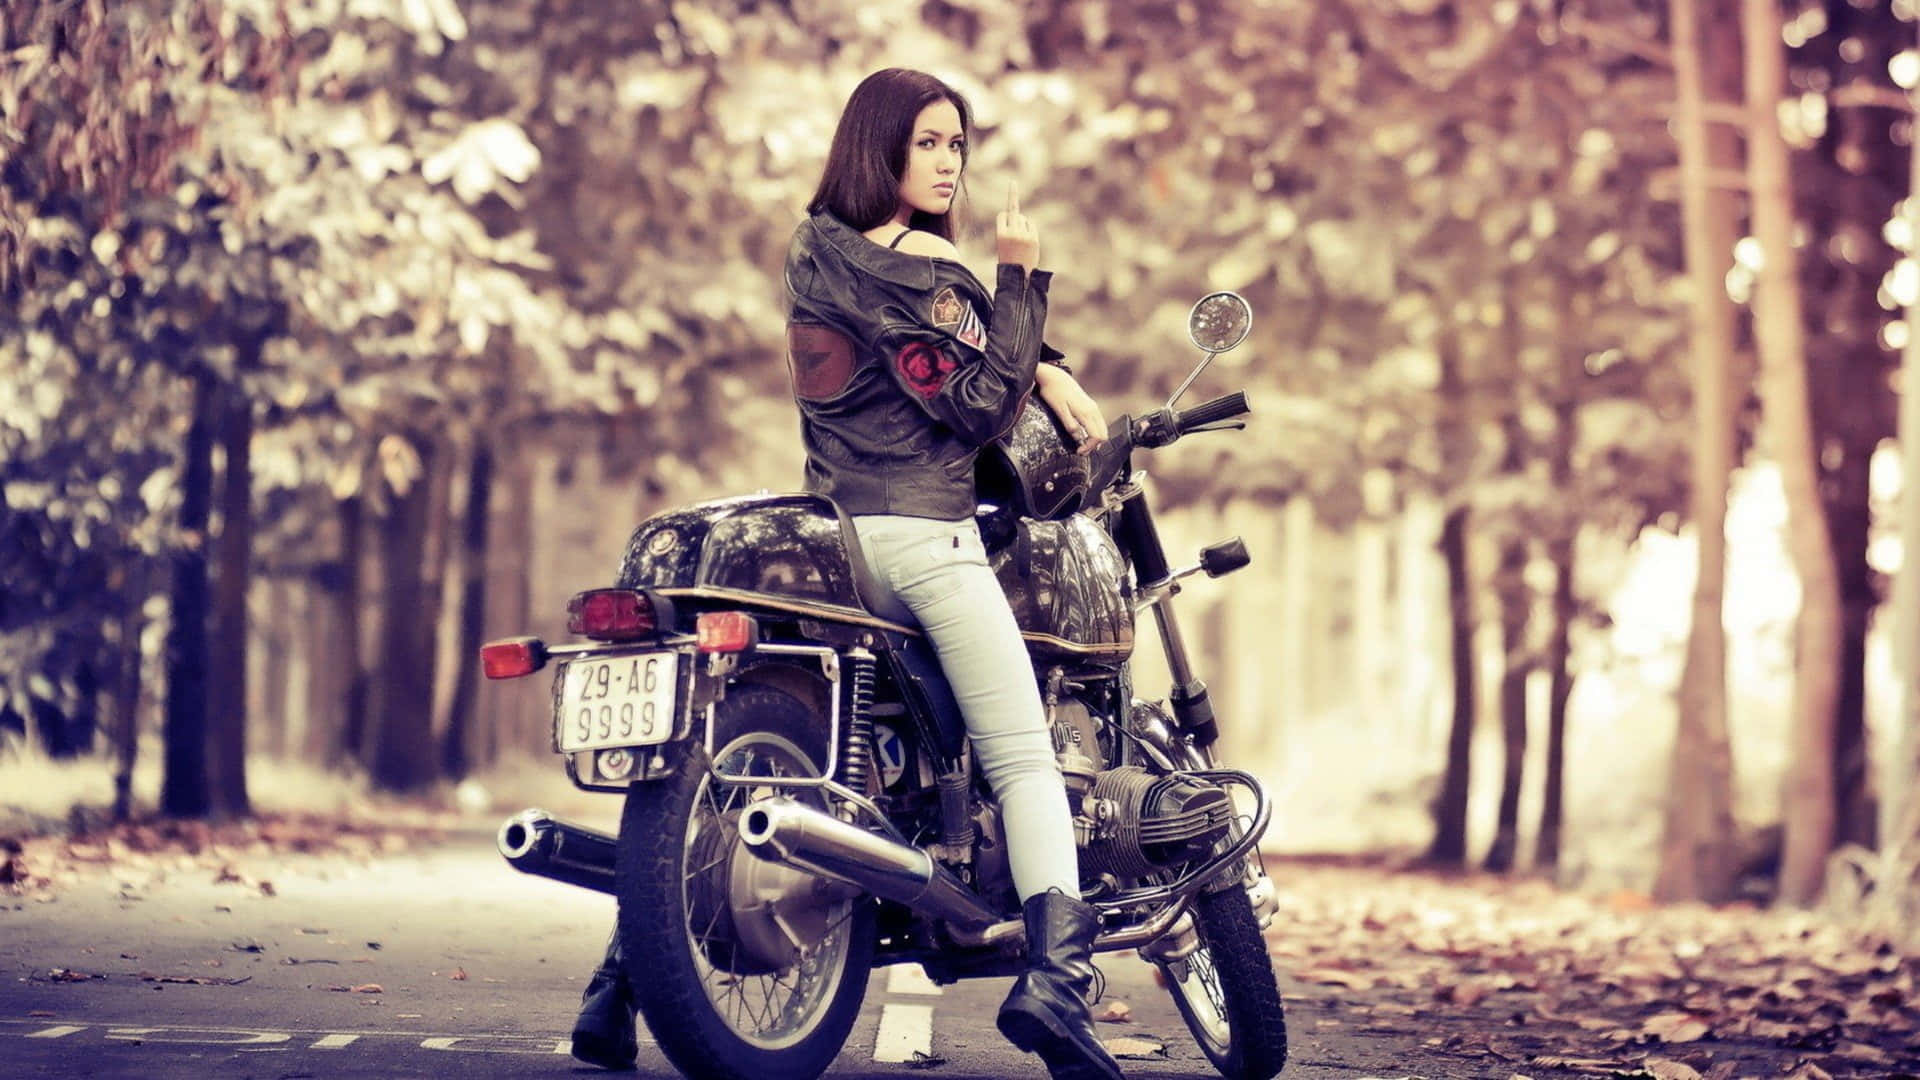 A Woman Sitting On A Motorcycle In The Woods Wallpaper